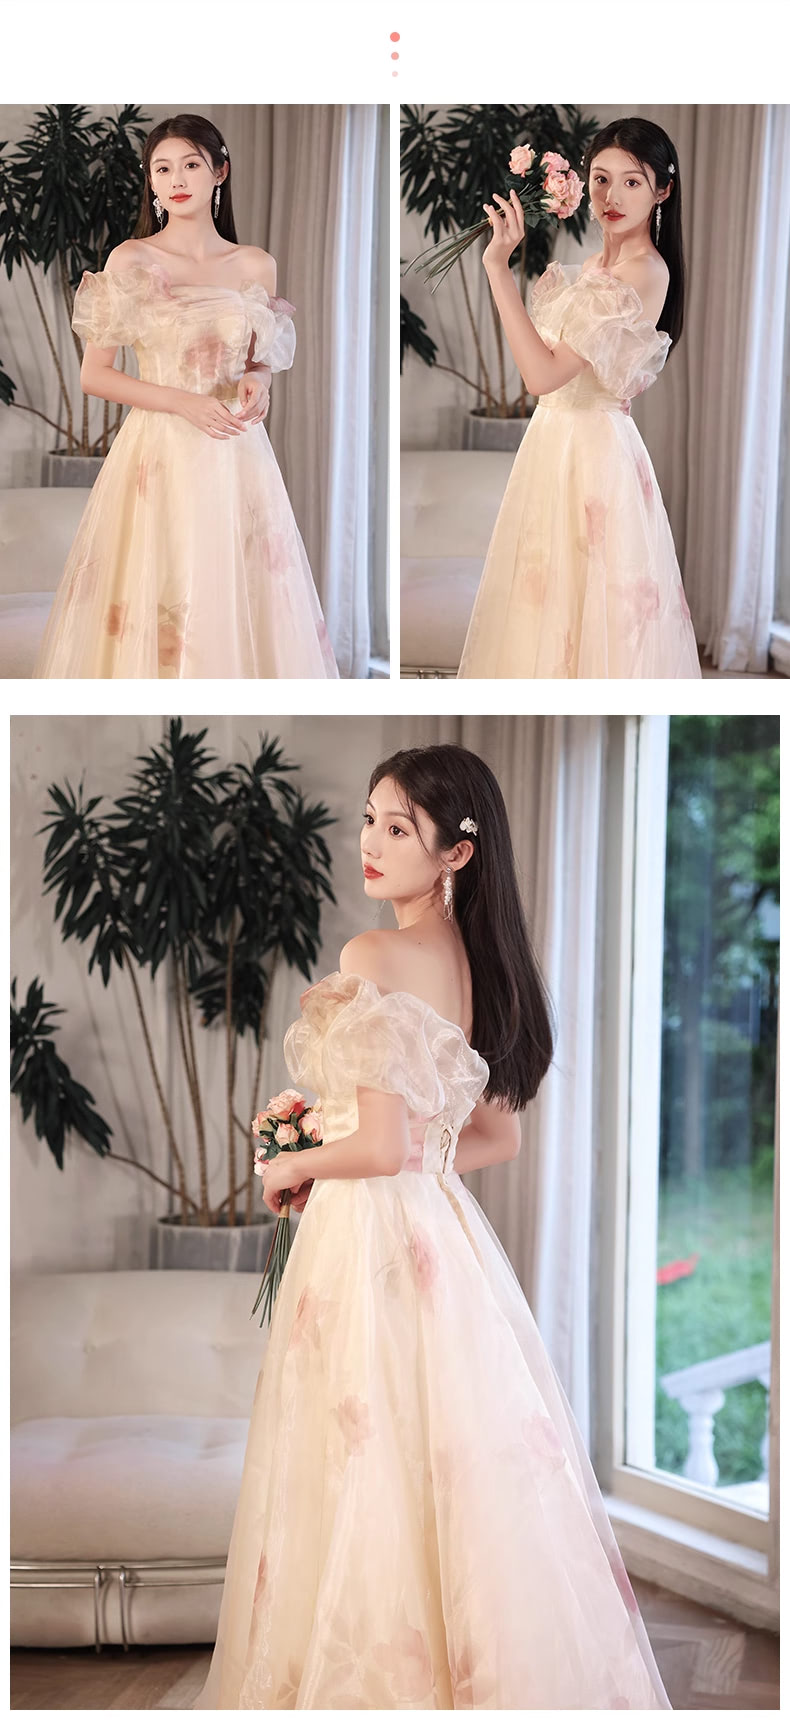 Charming-Tulle-Bridesmaid-Dress-Sweet-Wedding-Party-Evening-Gown23